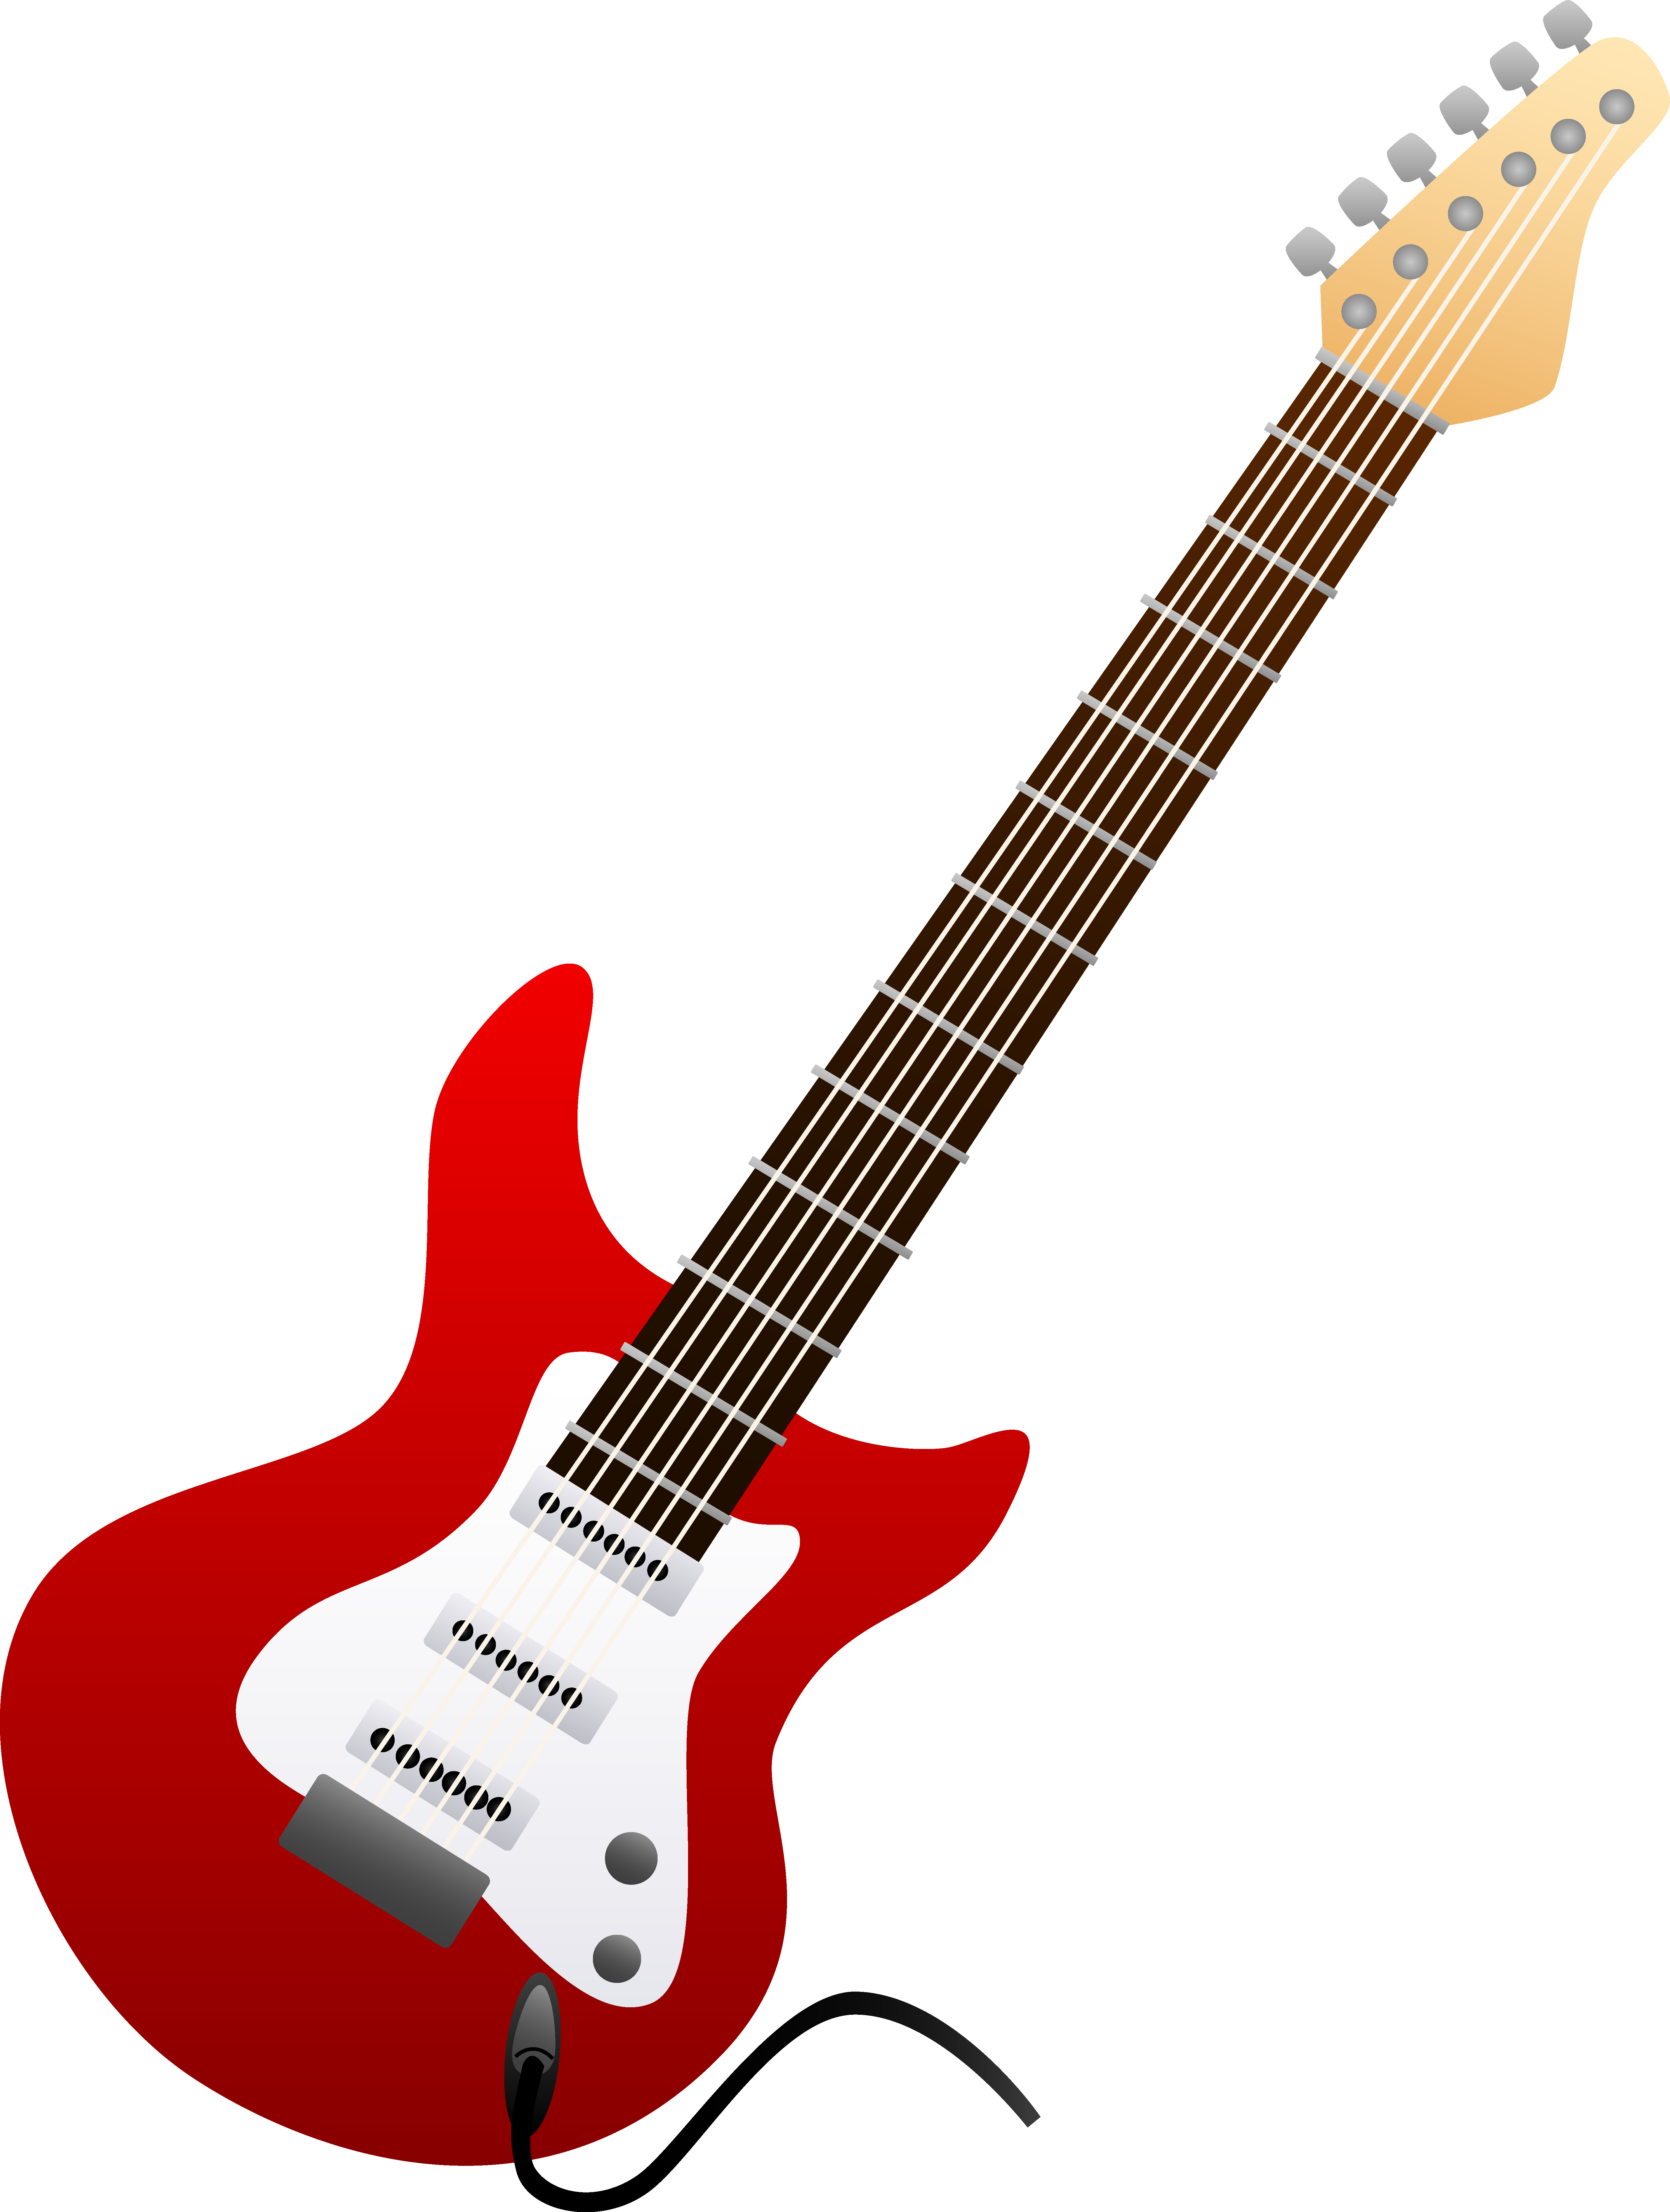 Guitar Cartoon Pictures - Cliparts.co